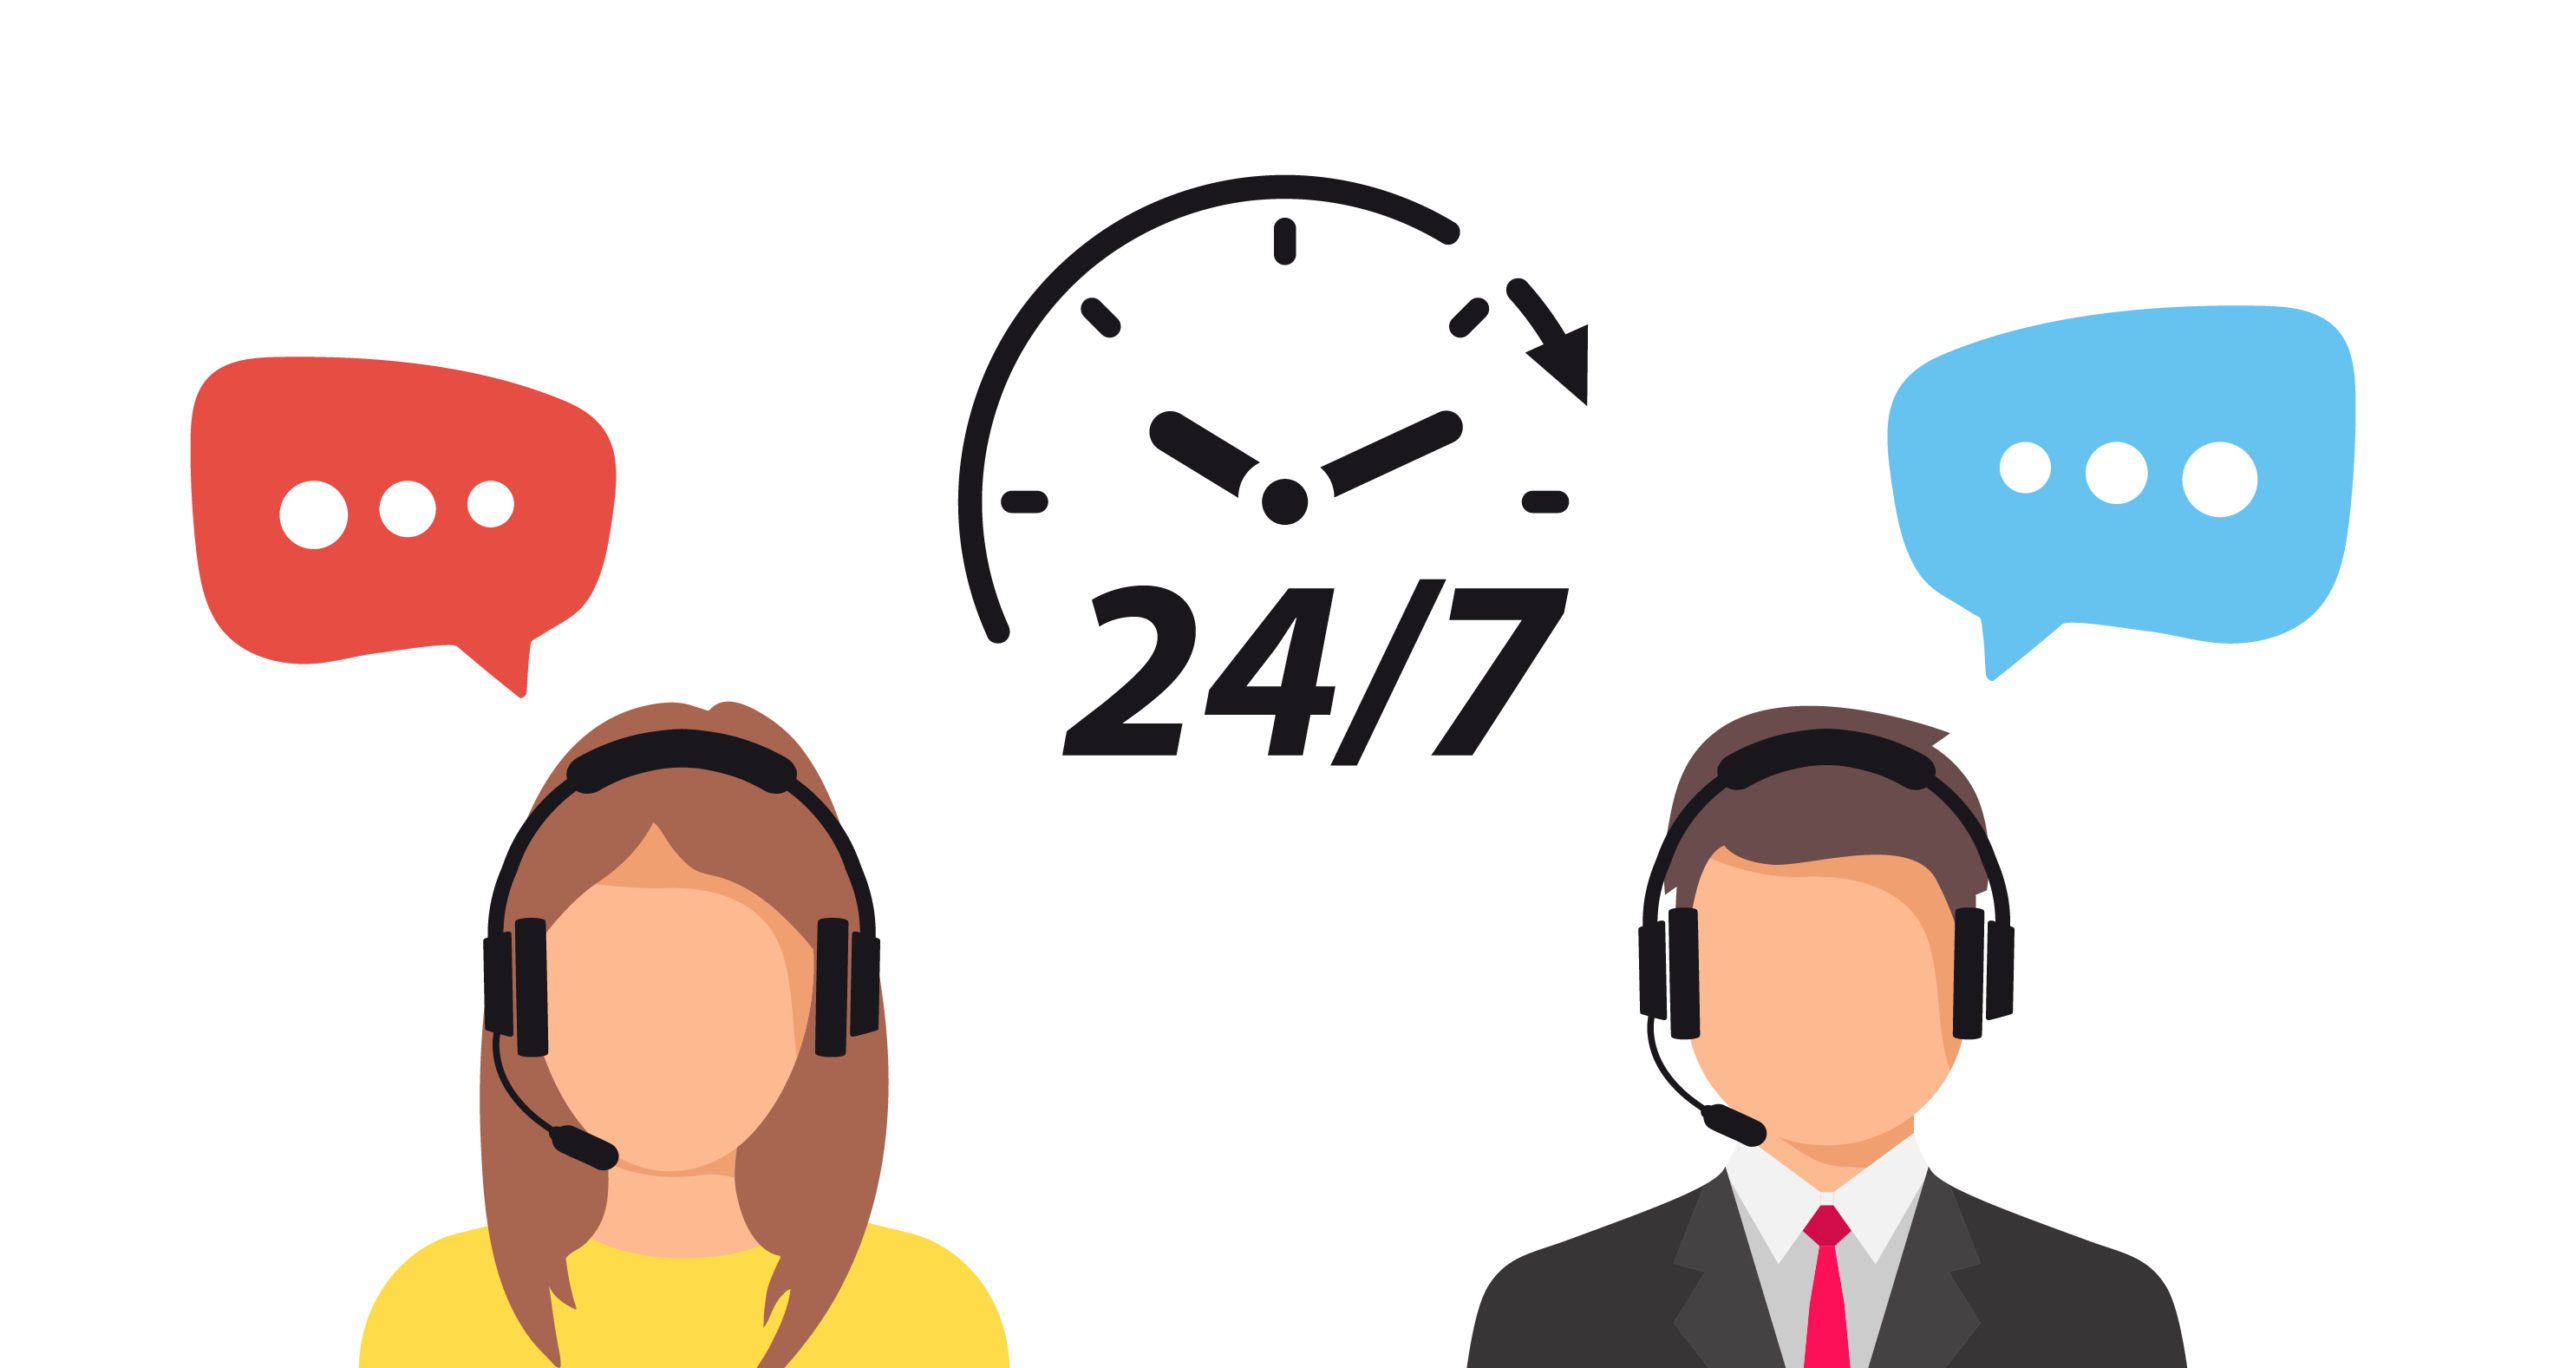 illustration of two phone operators with a 24/7 clock between them